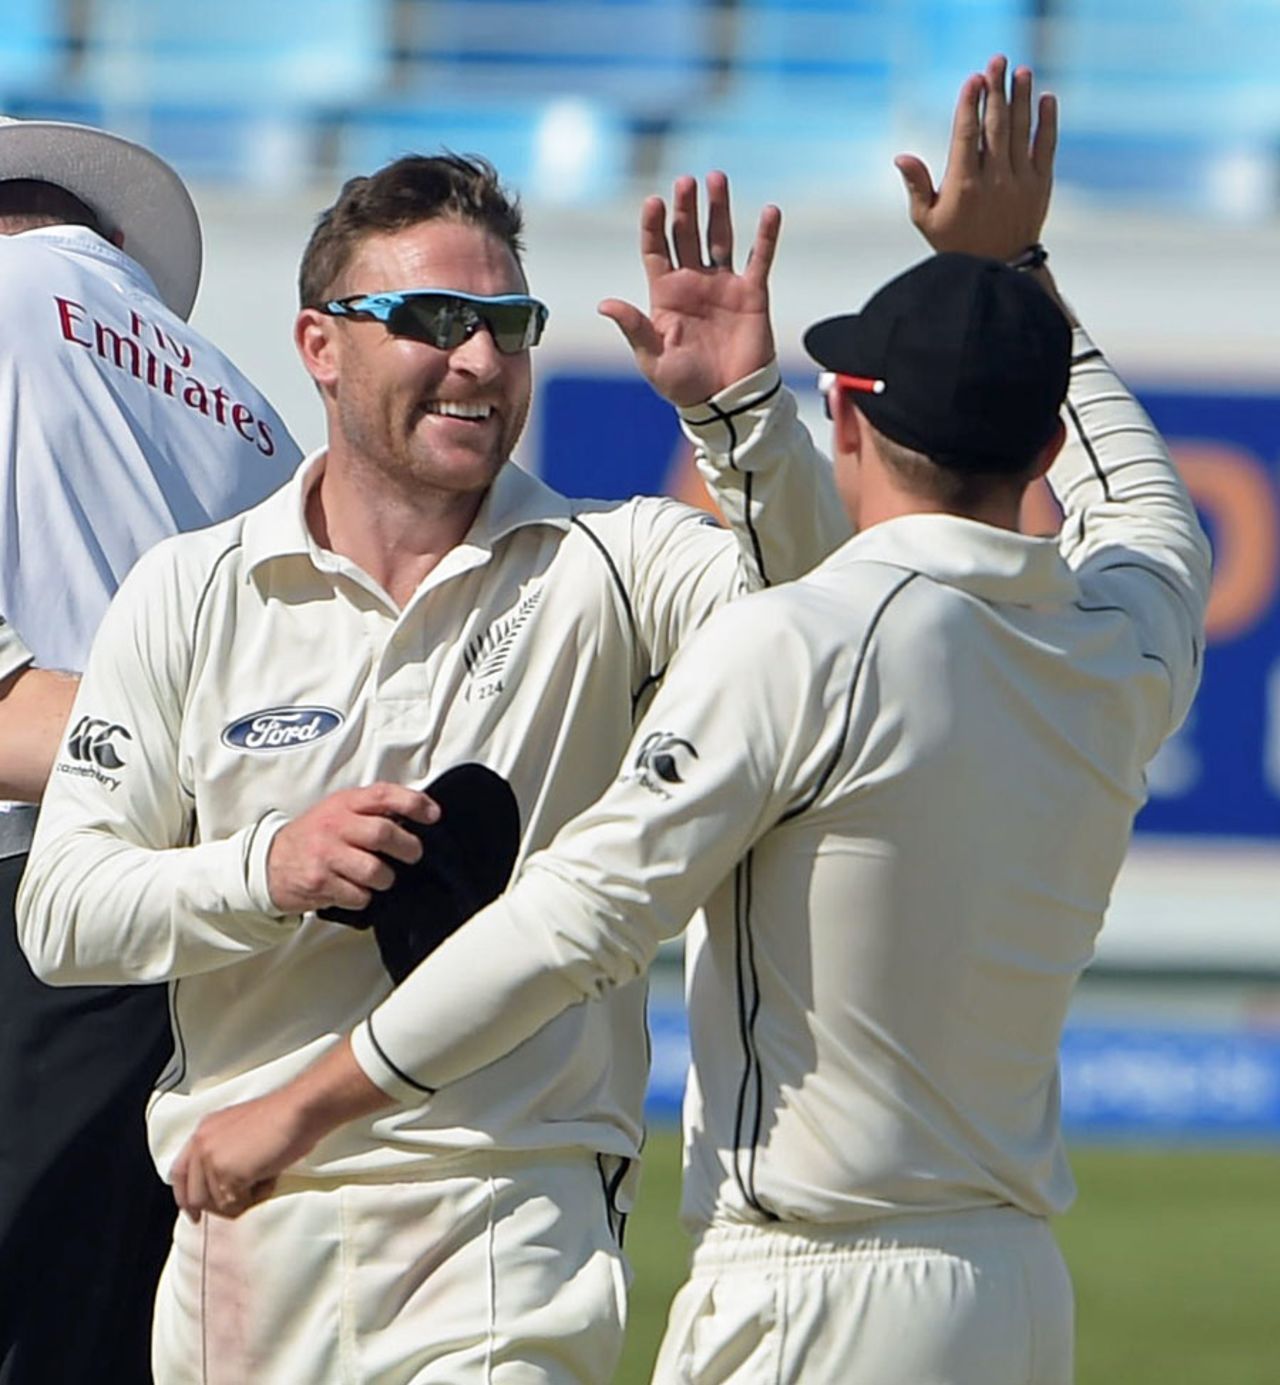 Brendon McCullum dismissed Sarfraz Ahmed for his first Test wicket, Pakistan v New Zealand, 2nd Test, Dubai, 4th day, November 20, 2014